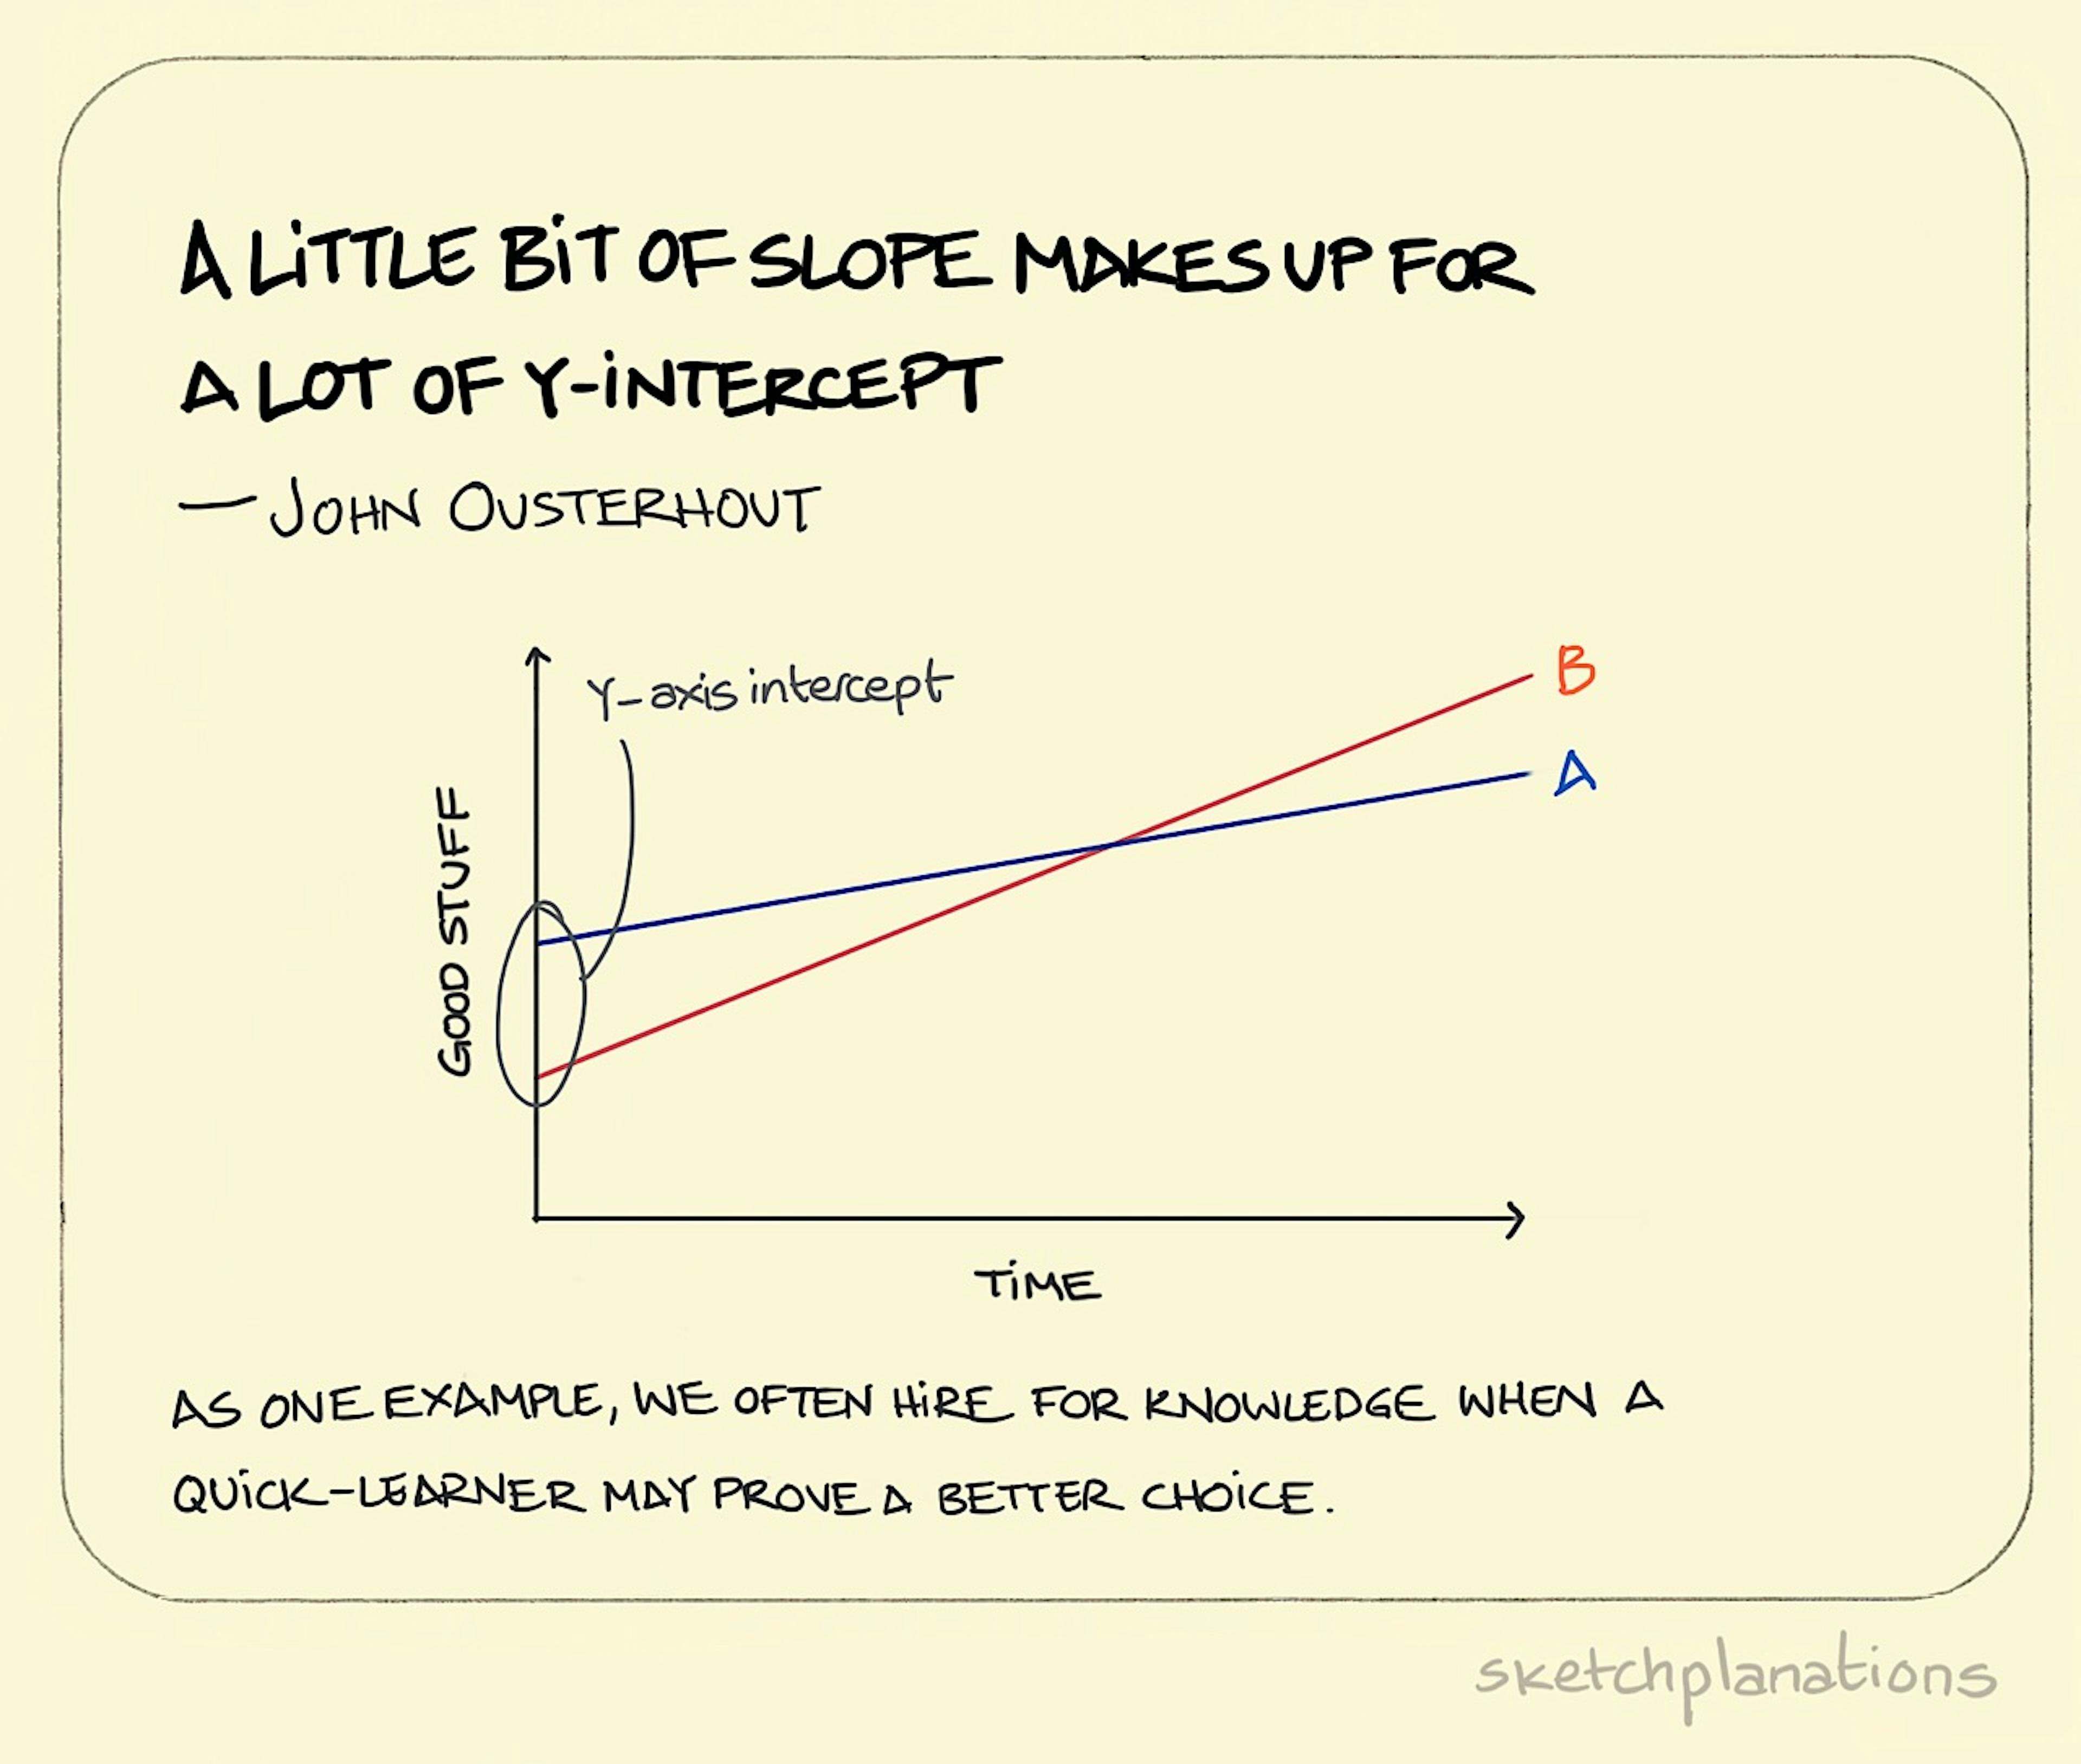 A little bit of slope makes up for a lot of Y-intercept illustration: on a line graph, a red line starts well below the blue line, but over time, it overtakes and surpasses the blue line because it has slightly more gradient to it. 